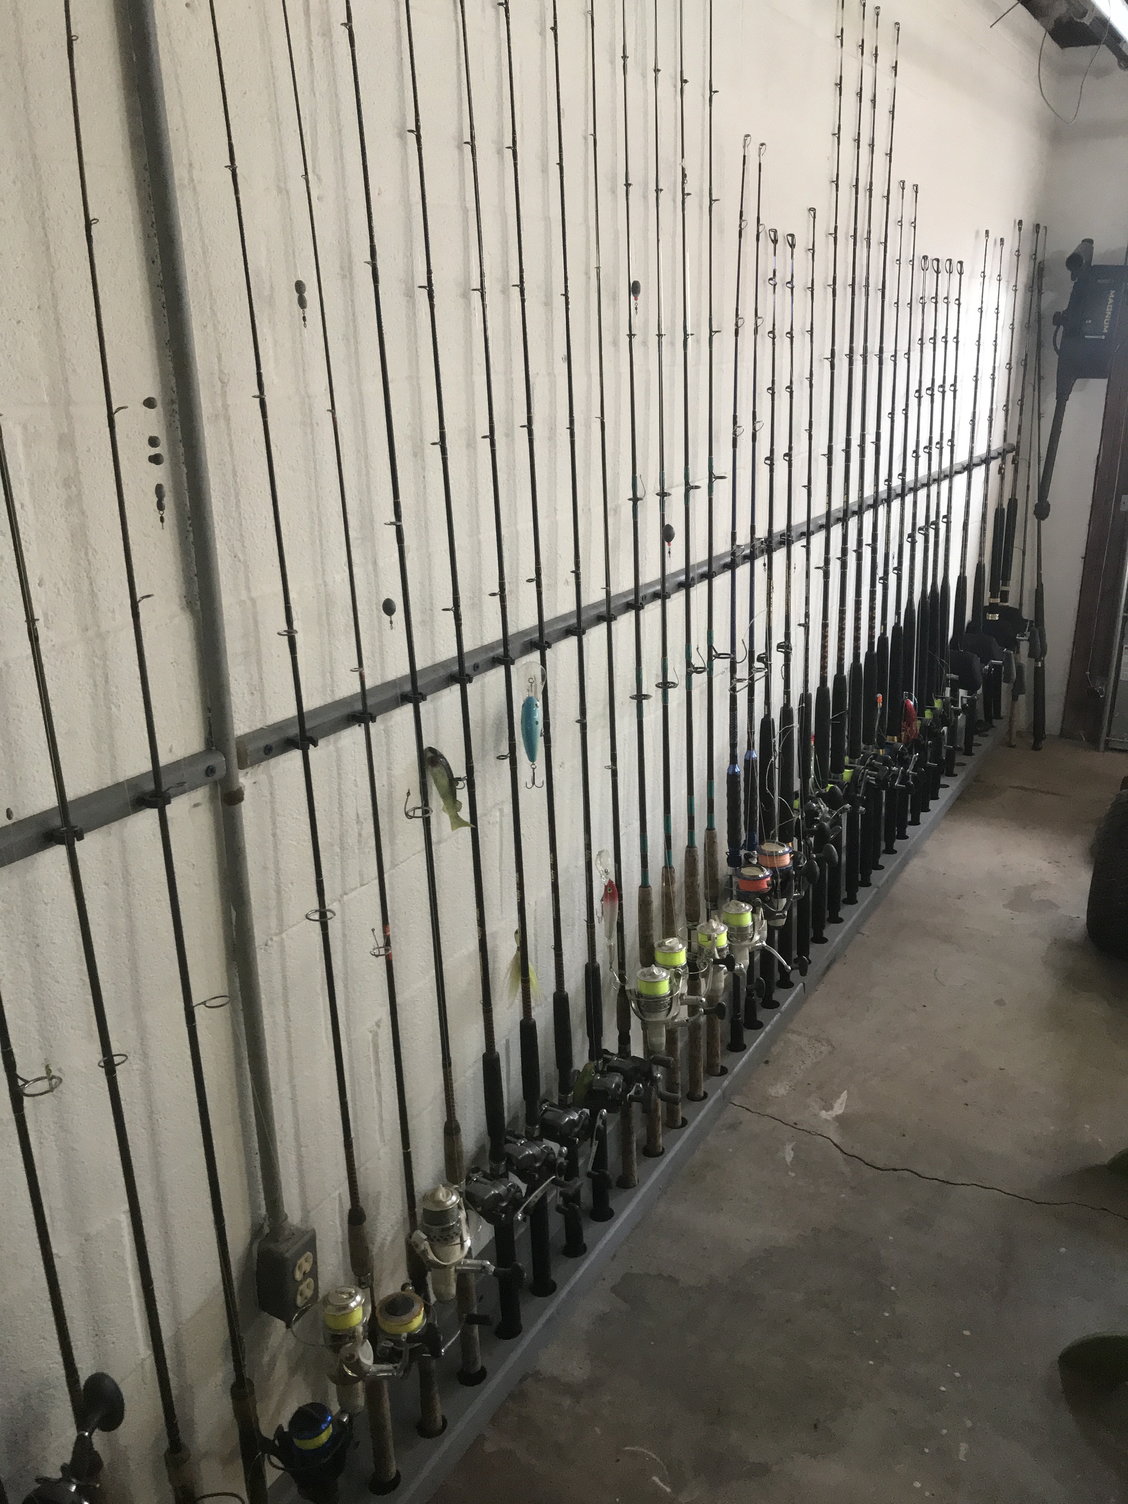 Wooden Rod Rack Ideas - The Hull Truth - Boating and Fishing Forum